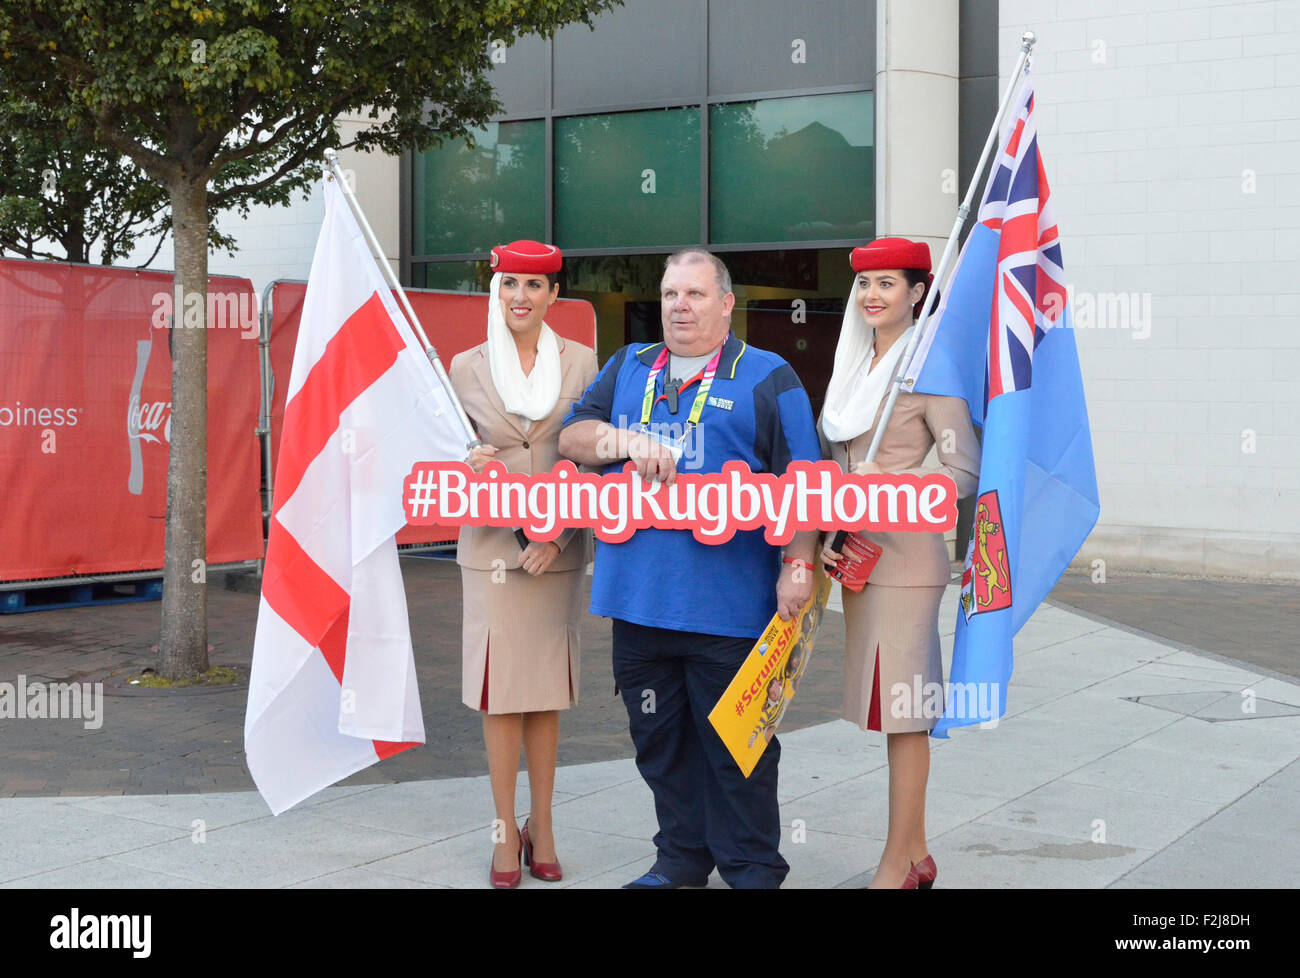 Rugby supporter at the 2015 world Cup in Twickenham, England with Emirates Air hostesses stewardesses Stock Photo